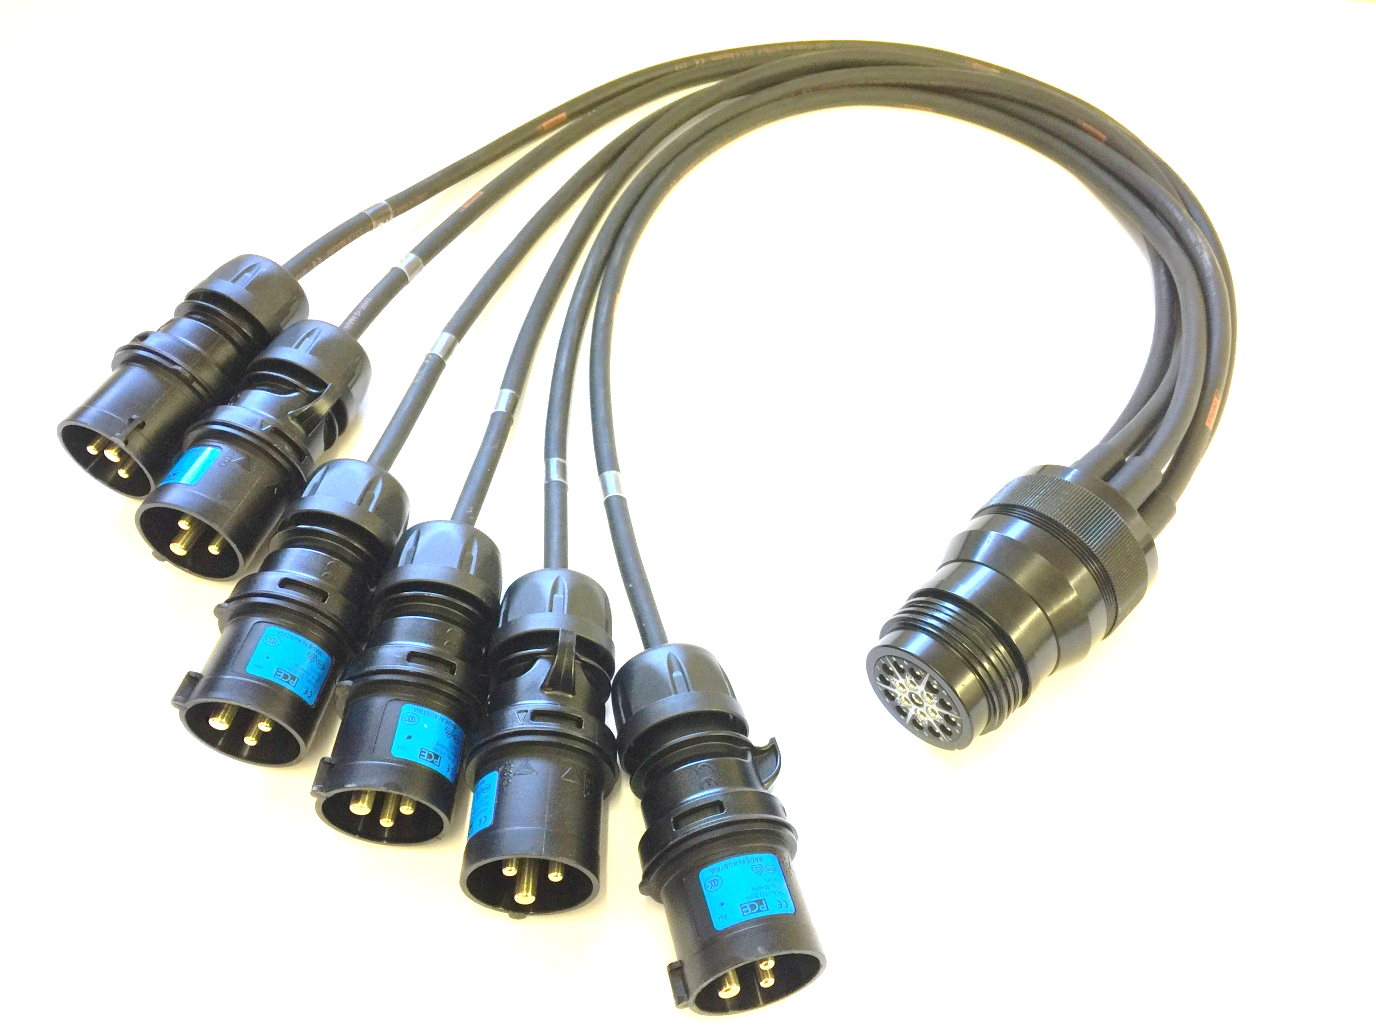 Female Socapex Spider 1 metre Leads With 16amp Plugs (Fan-In)